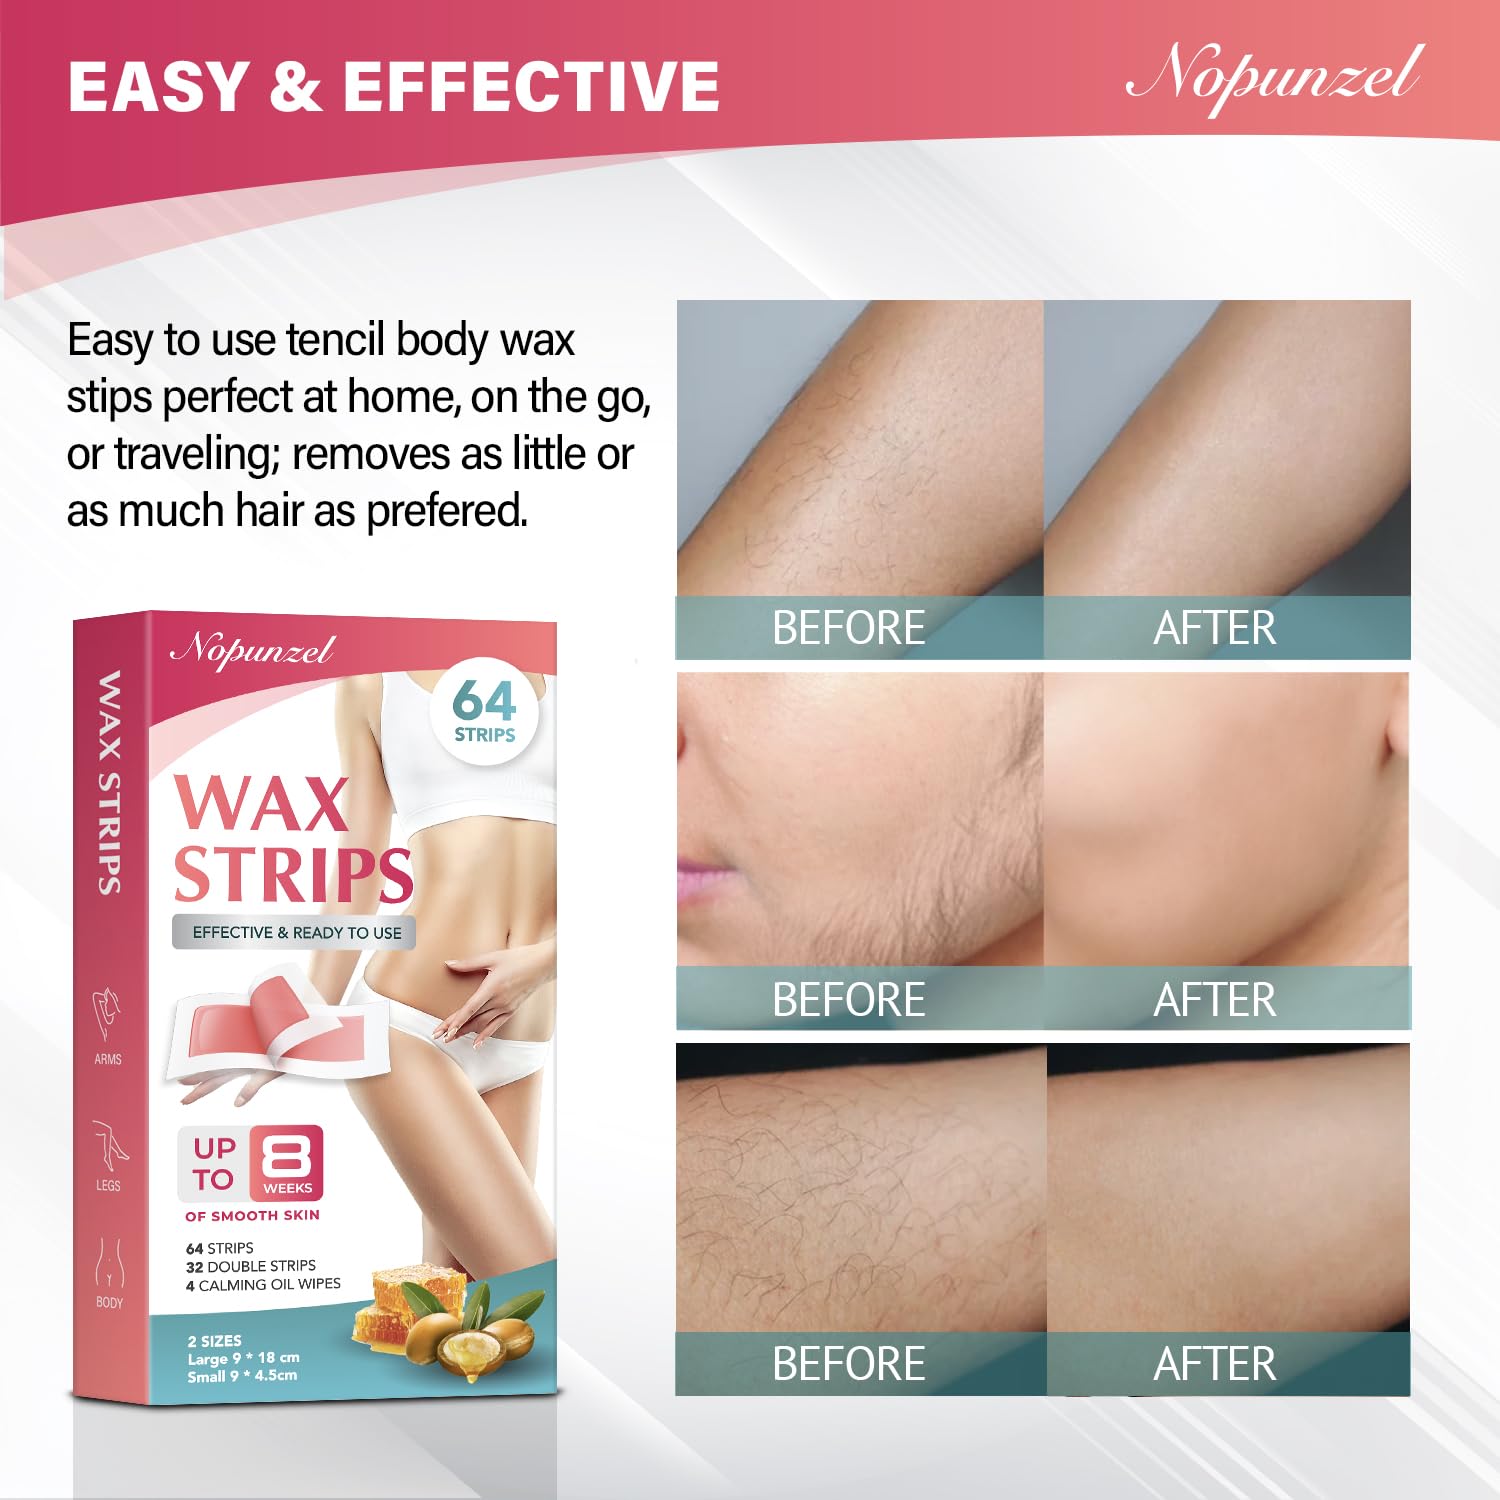 Wax Strips 64 counts, Wax Strips for Hair Removal, Waxing Strips, Bikini Wax, Bikini Wax Kit, Wax Strips for Brazilian Waxing, Waxing Strips for Body, Legs, Arms, Chest - 4 Wipes (2 Sizes) (64 Count) : Beauty & Personal Care